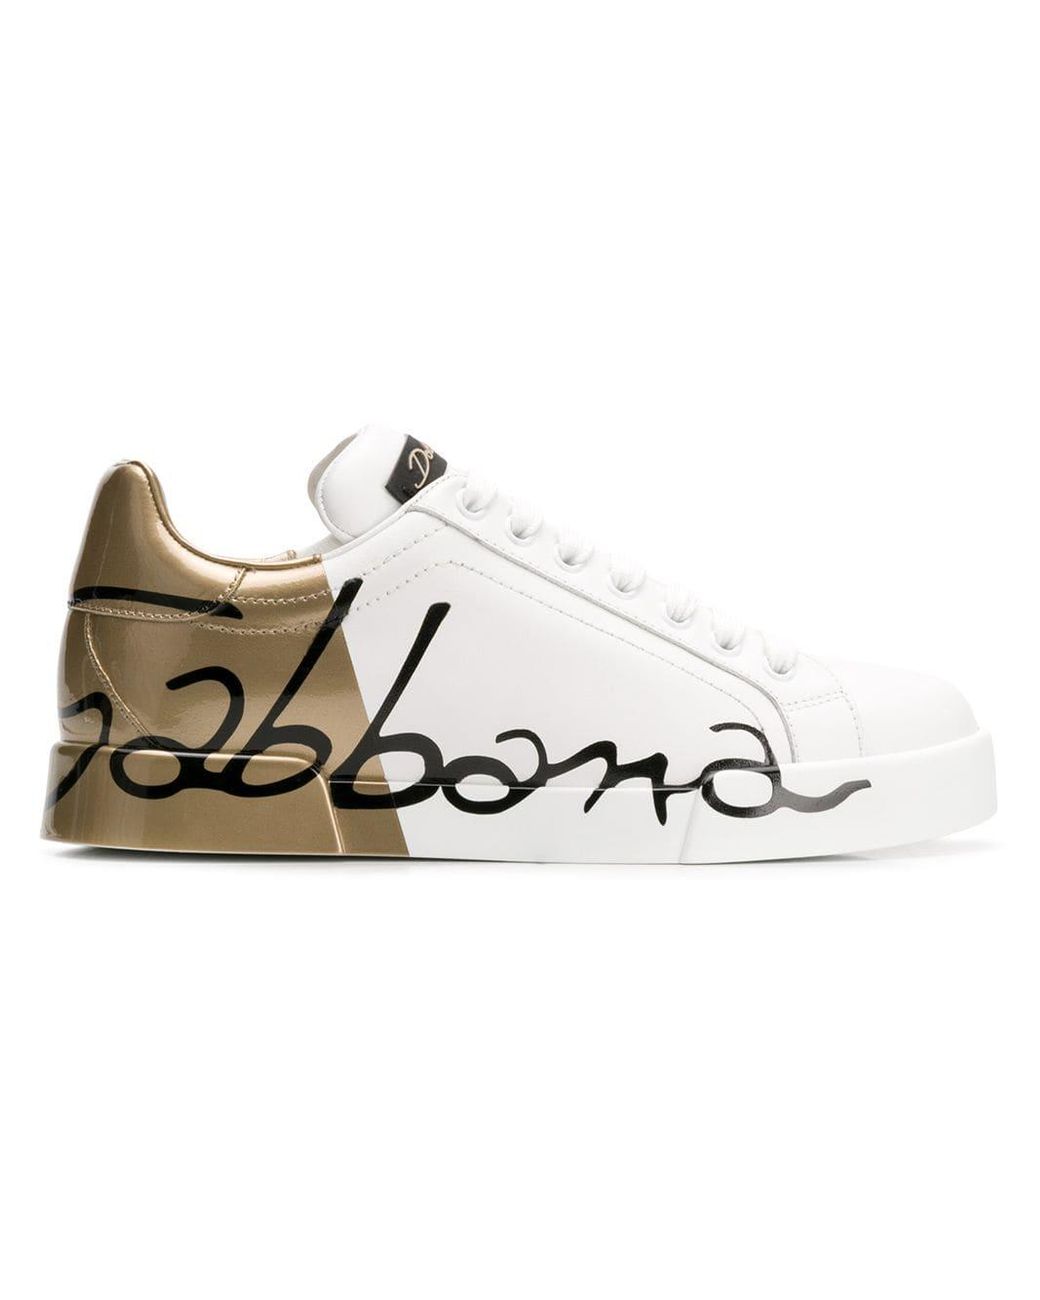 dolce and gabbana logo print sneakers